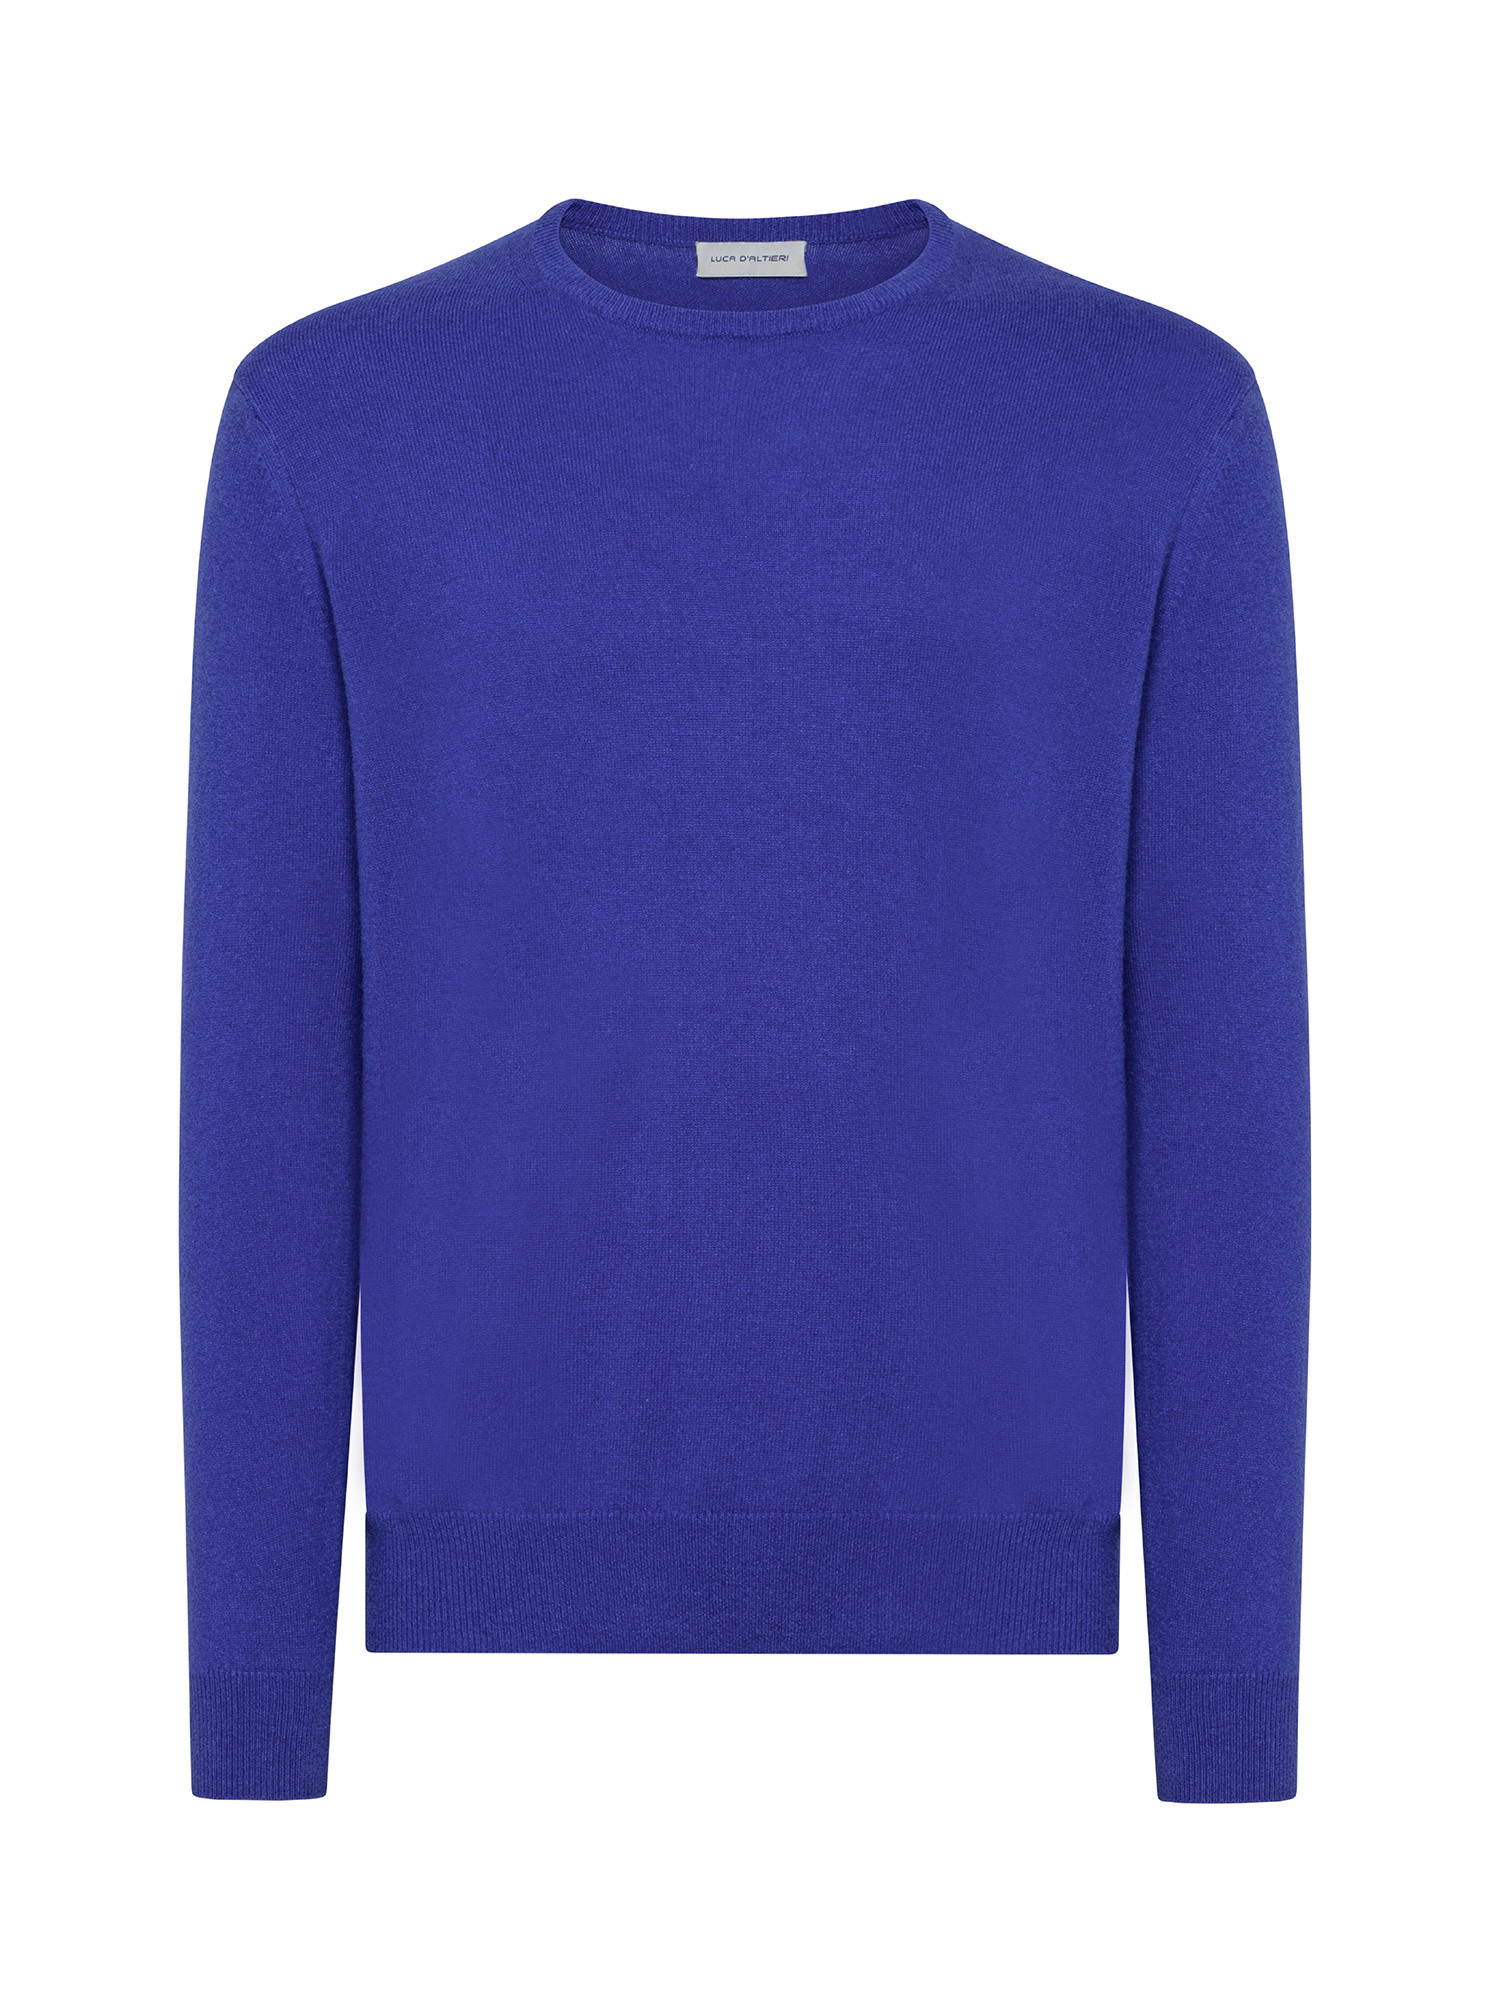 Pullover girocollo in puro cashmere, Blu, large image number 0